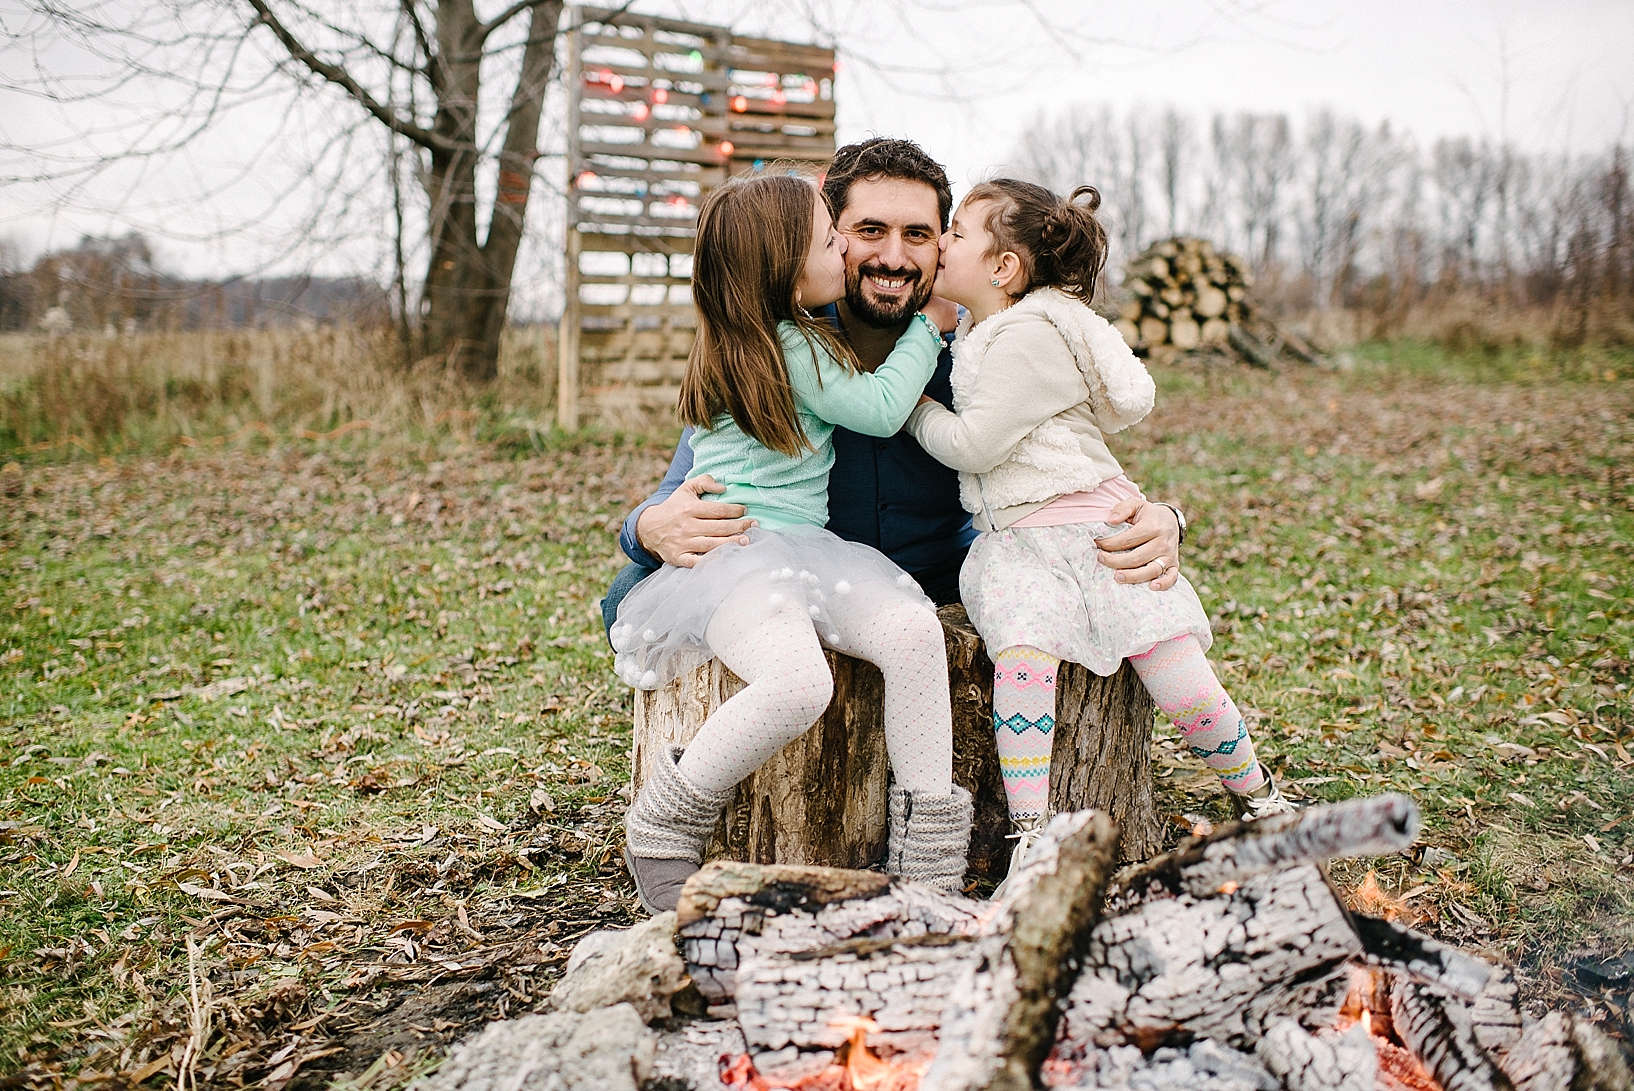 young girls dressed in colorful winter outfits sitting on tree stumps by campfire kissing their dad's cheeks